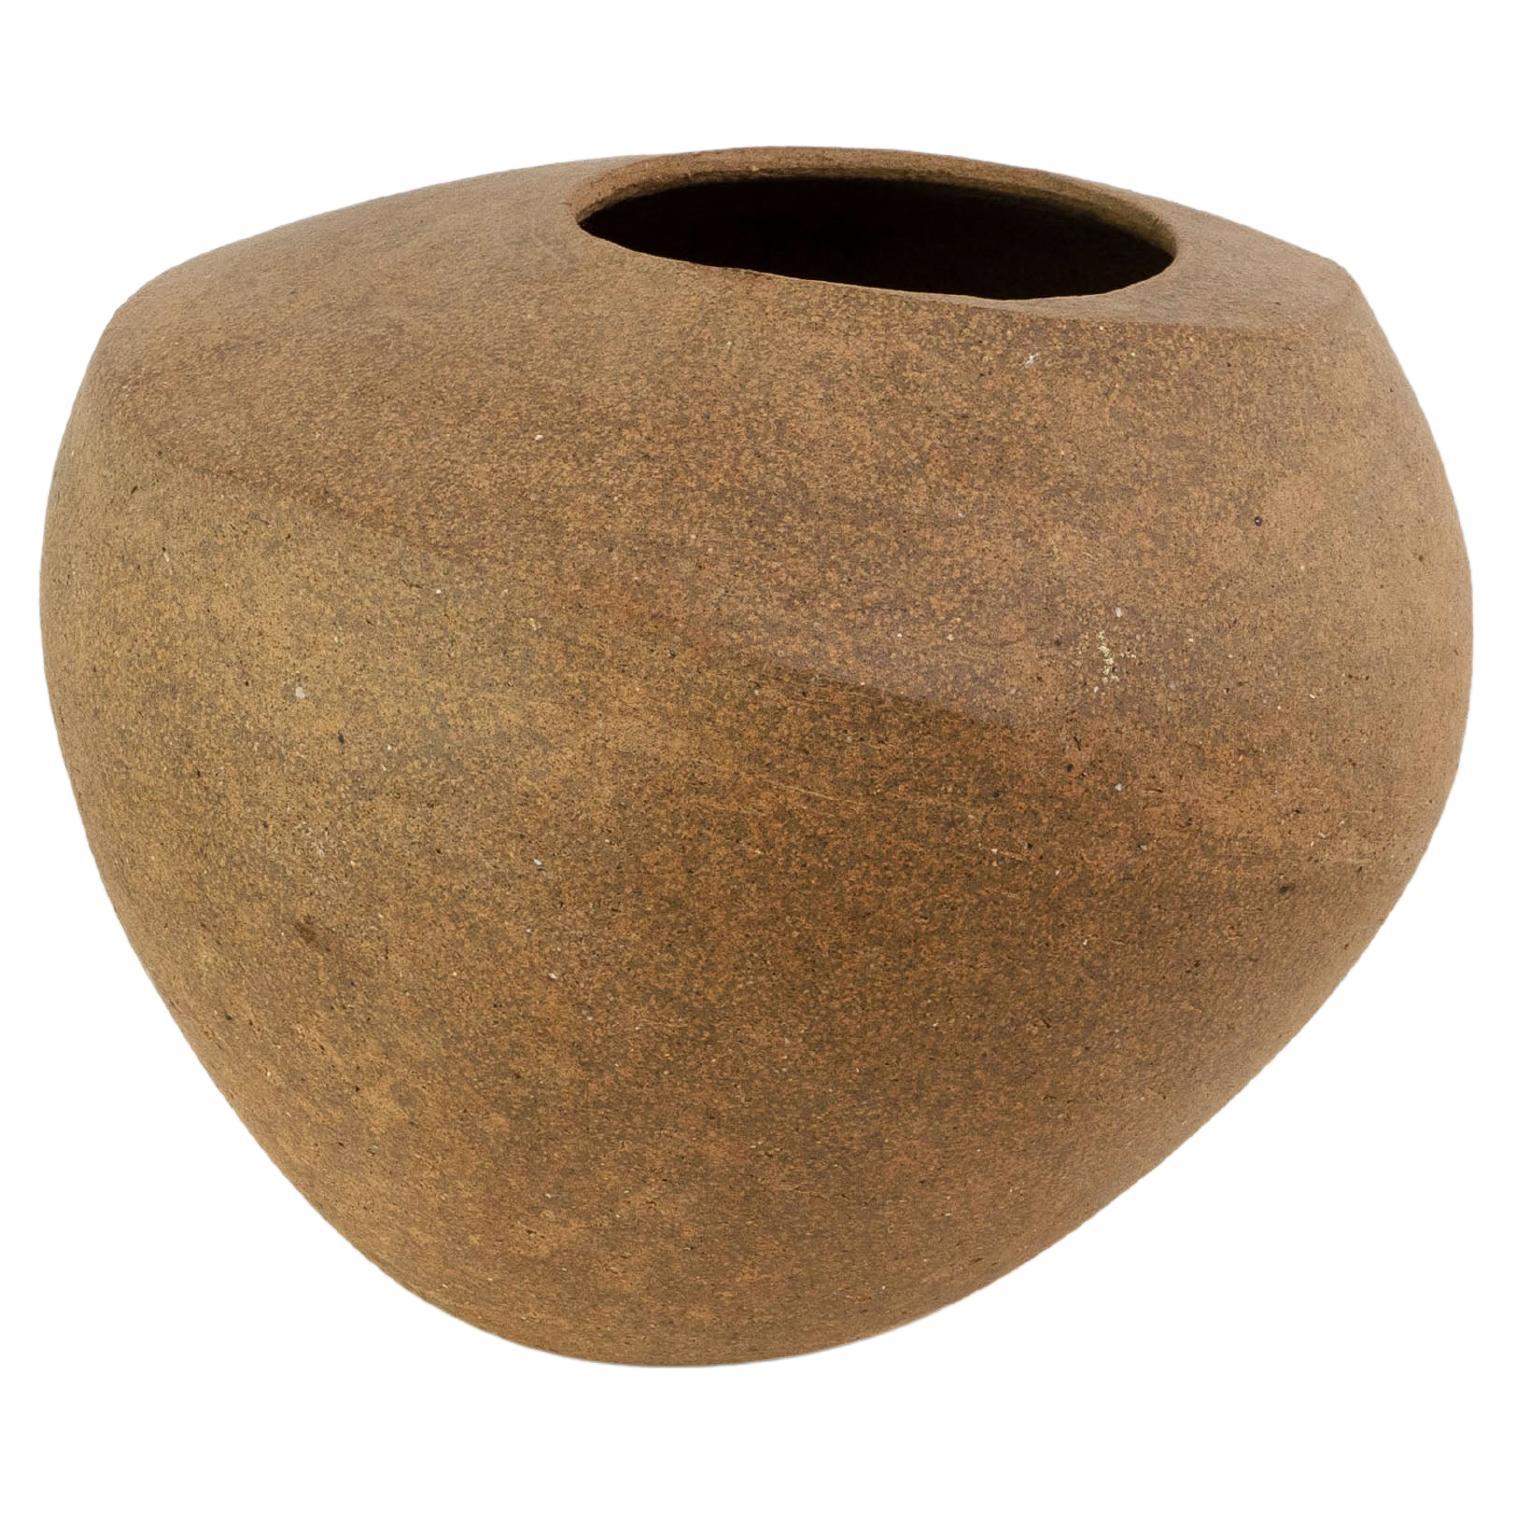 Asymmetrical Ovoid Stoneware Vessel For Sale